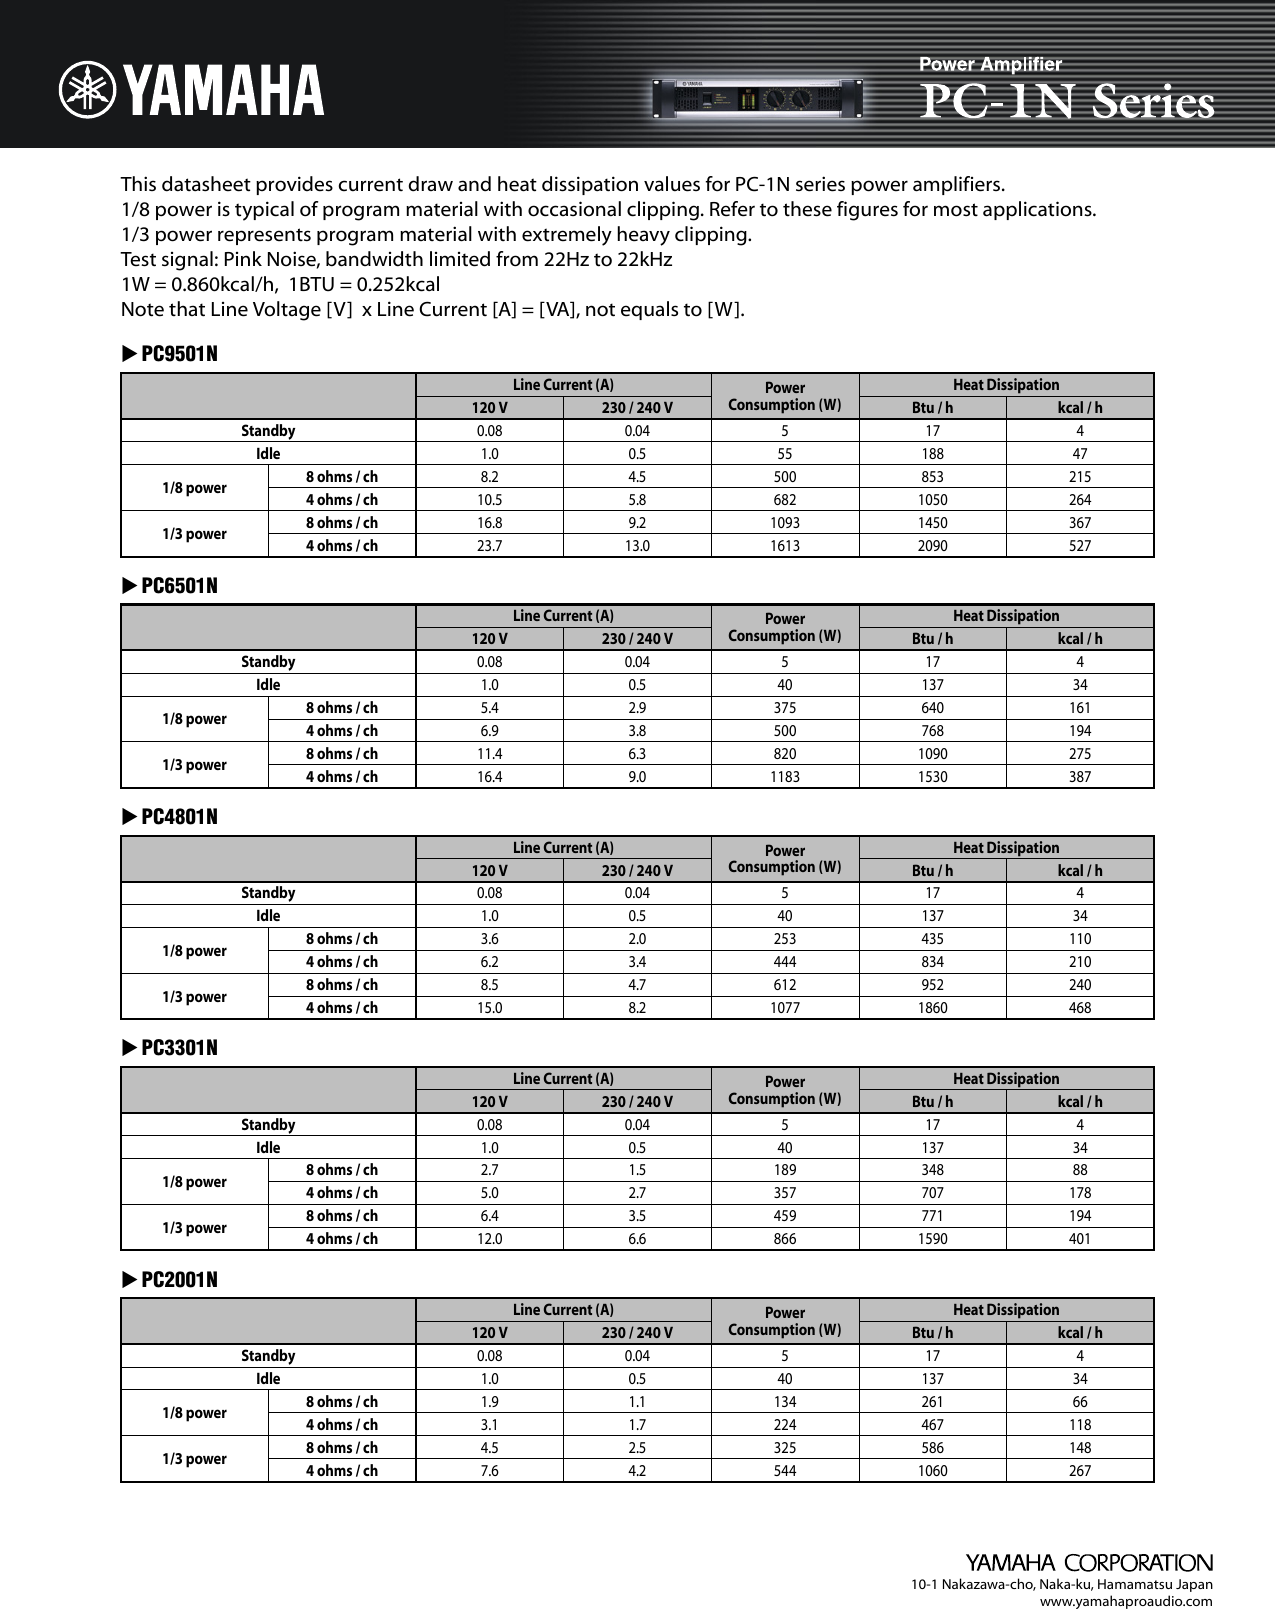 Page 1 of 1 - Yamaha PC1N Series Current Draw / Heat Dissipation Specifications And Data For PC-1N Heatspec En